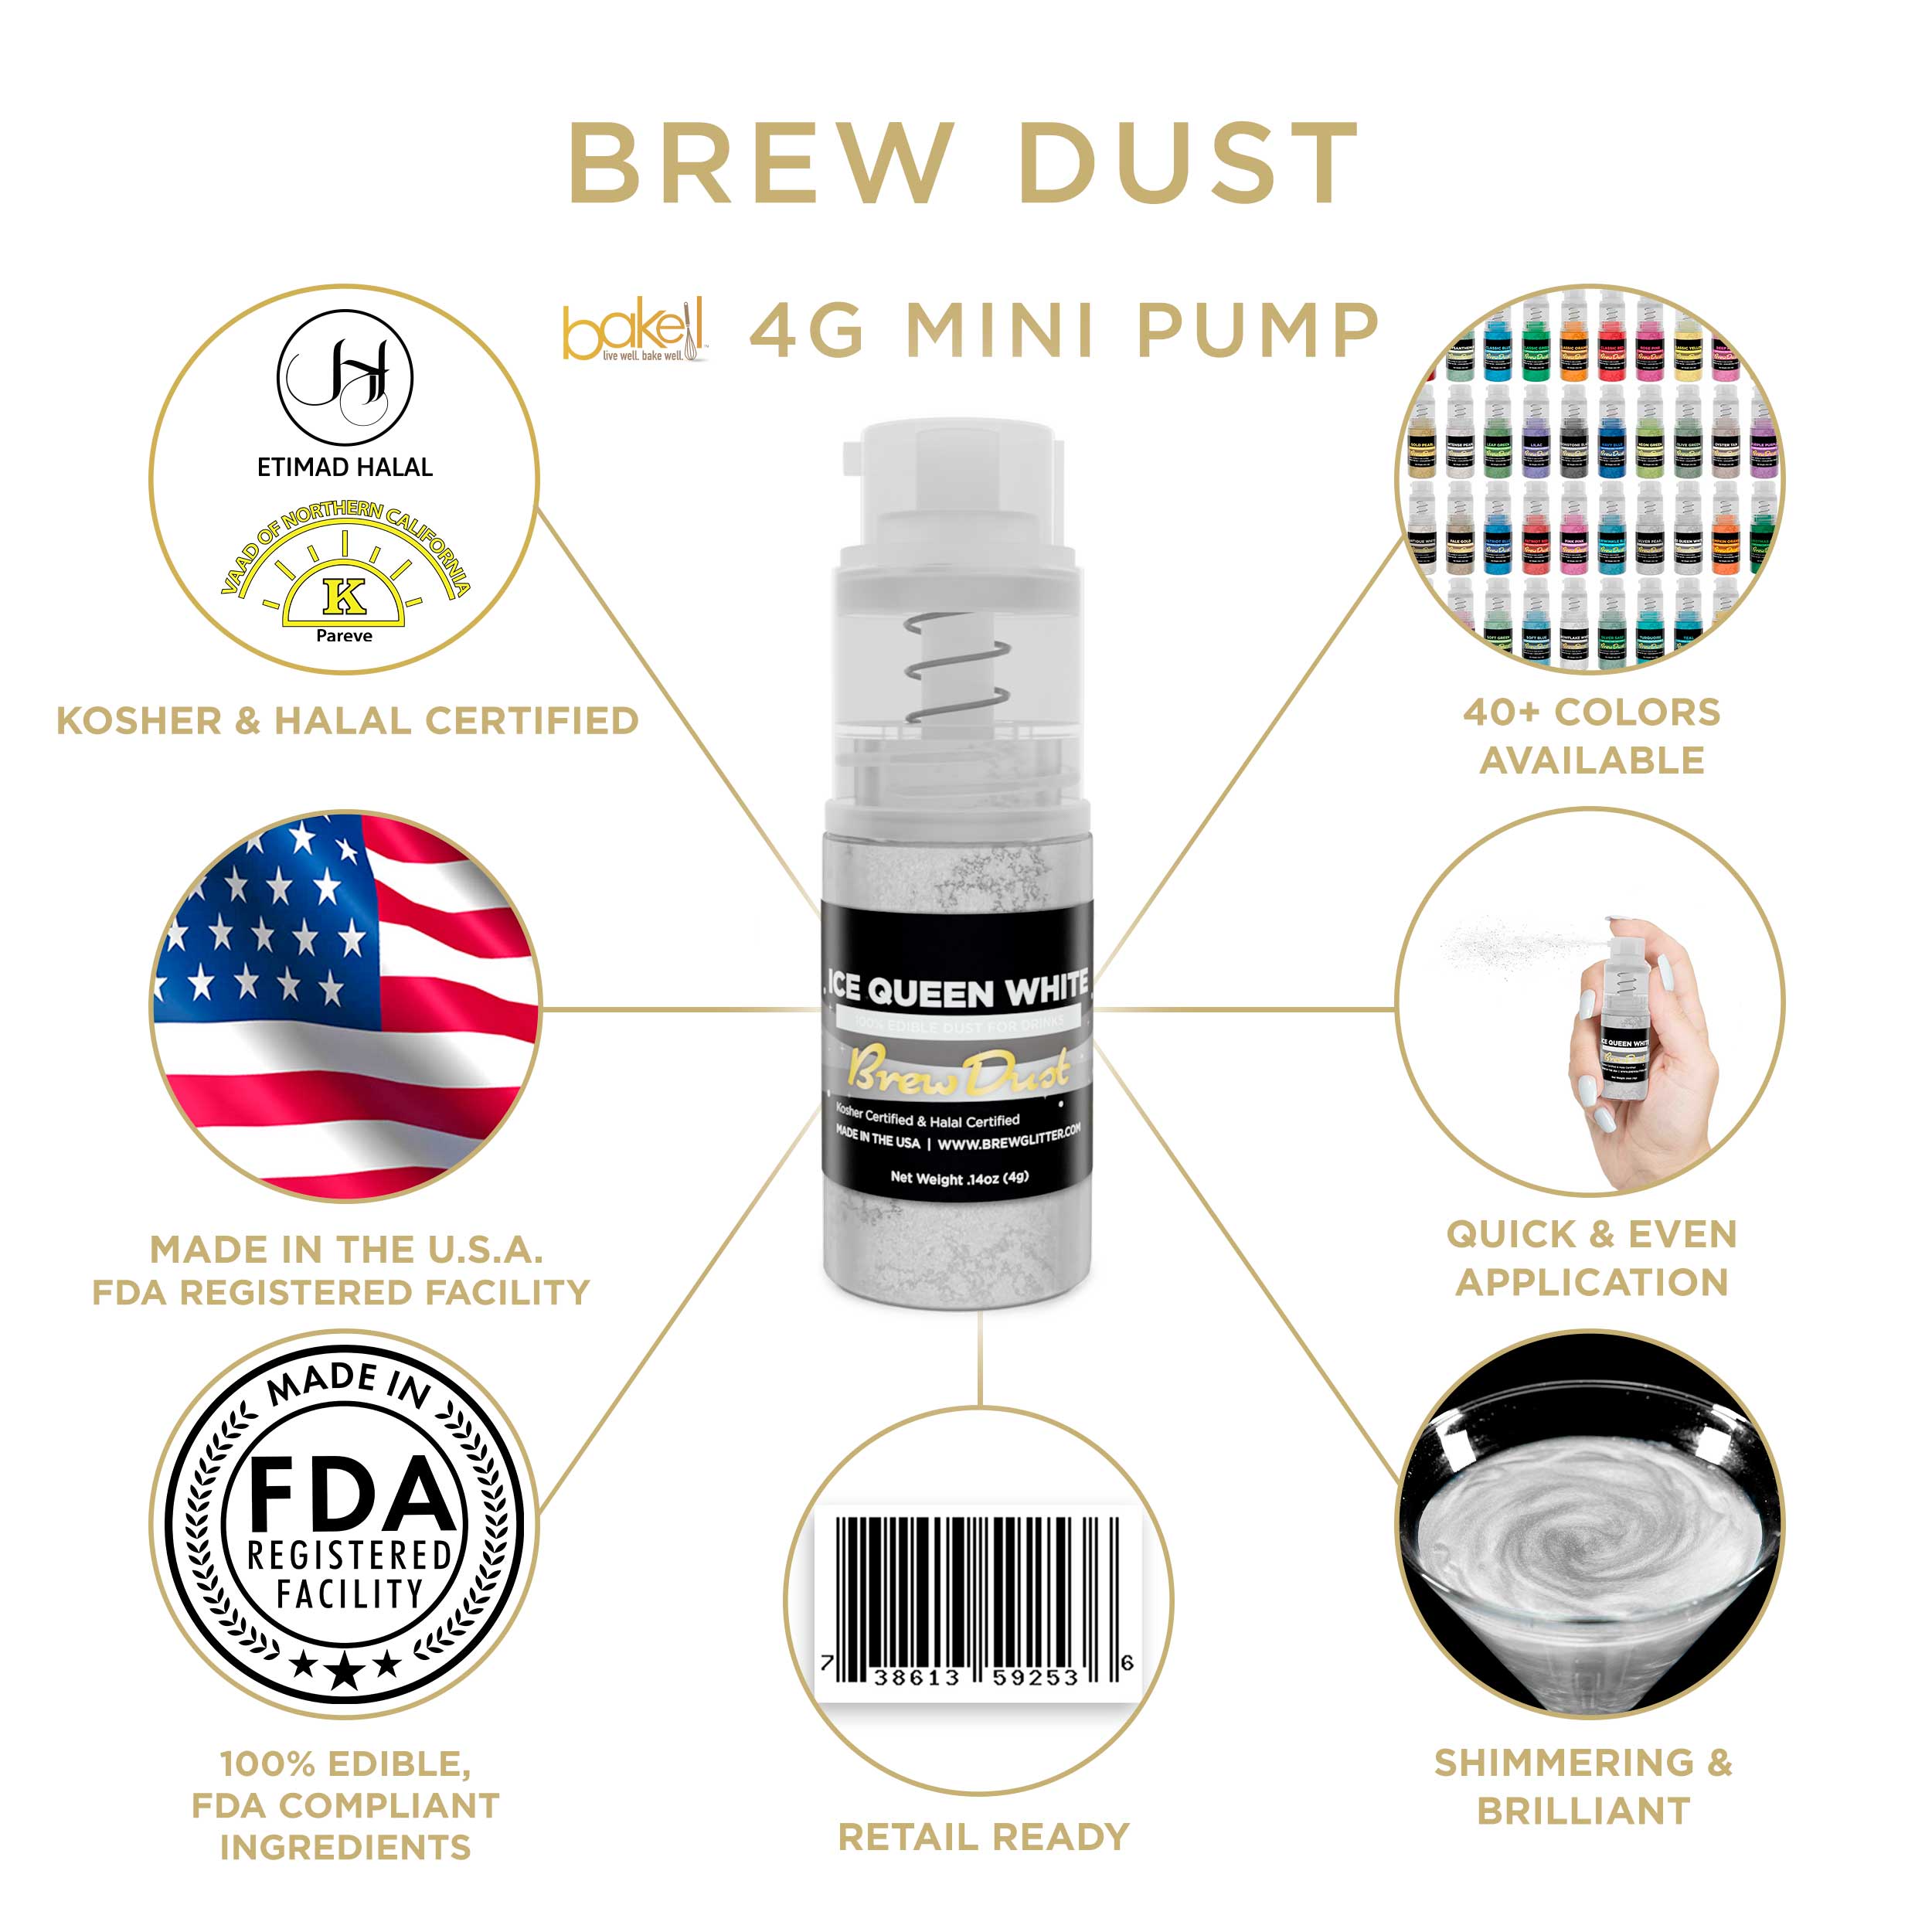 Ice Queen White Brew Dust Miniature Spray Pump | Infographic and Information